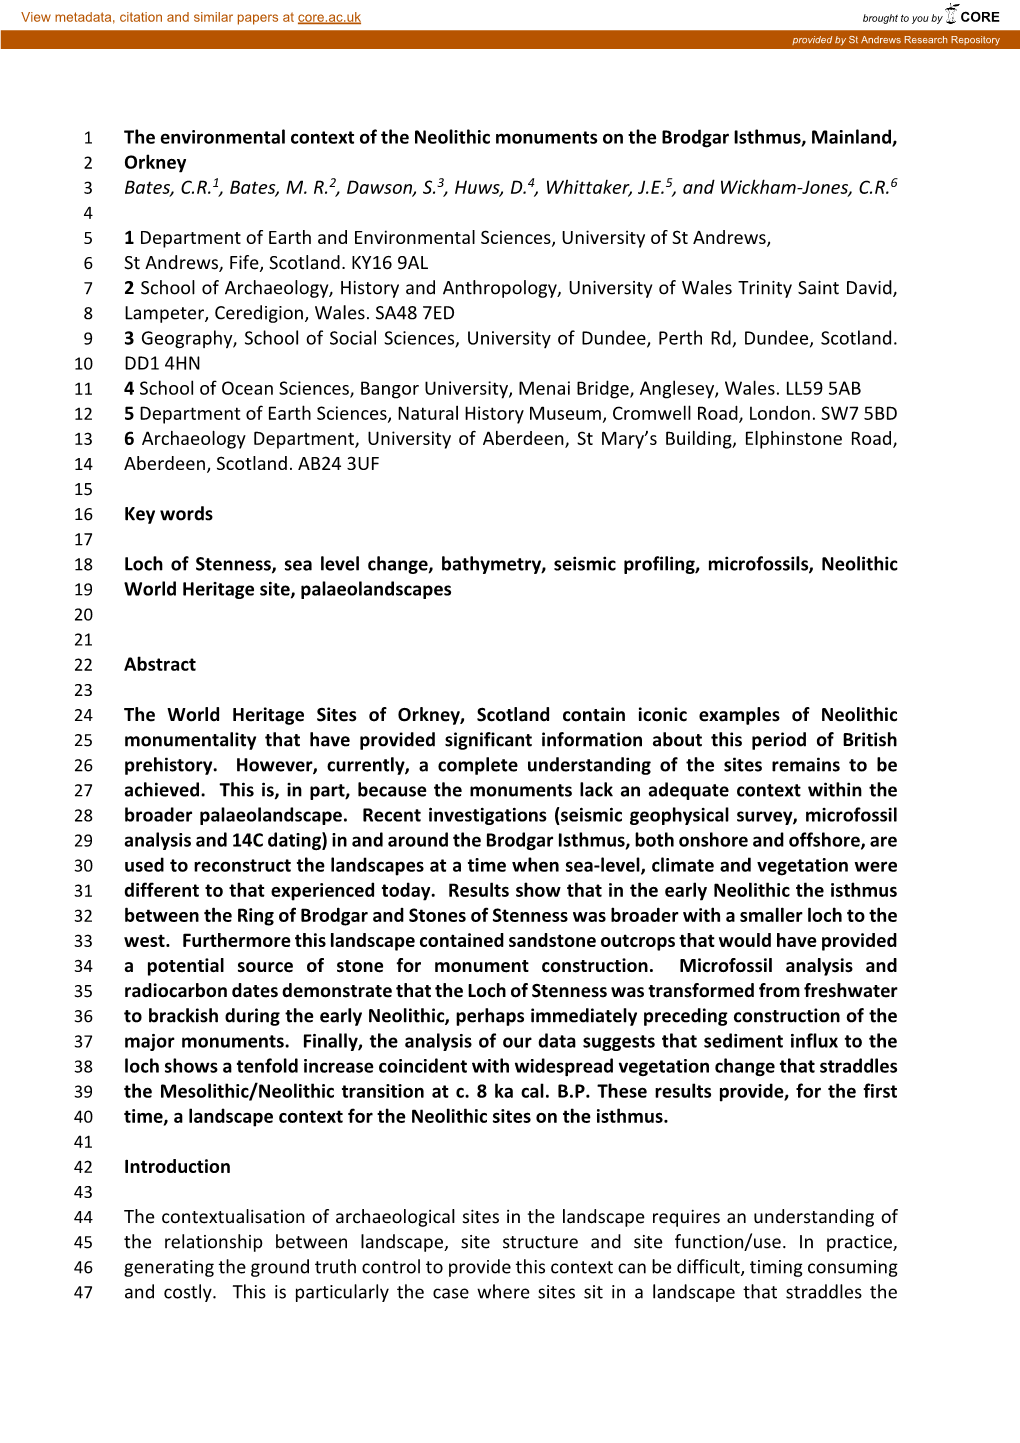 The Environmental Context of the Neolithic Monuments on the Brodgar Isthmus, Mainland, 2 Orkney 3 Bates, C.R.1, Bates, M